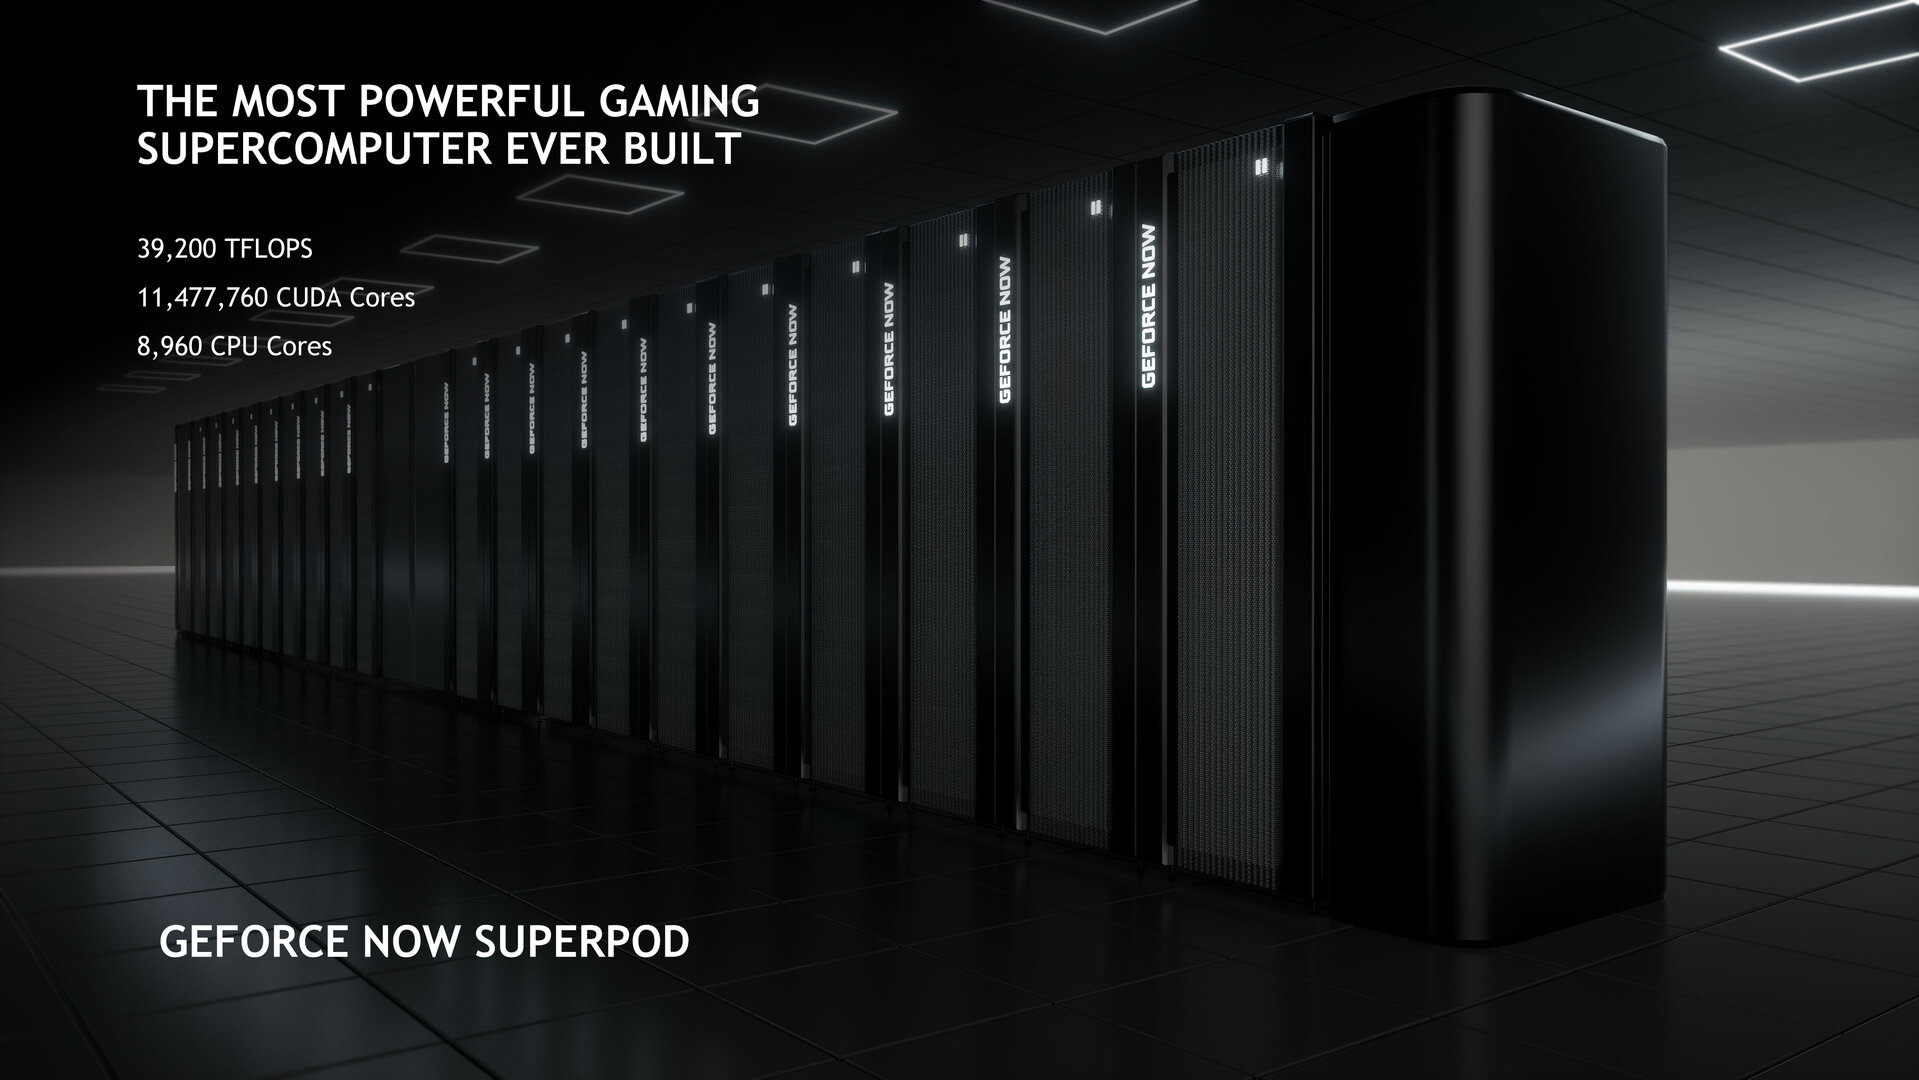 The new GeForce Now SuperPOD